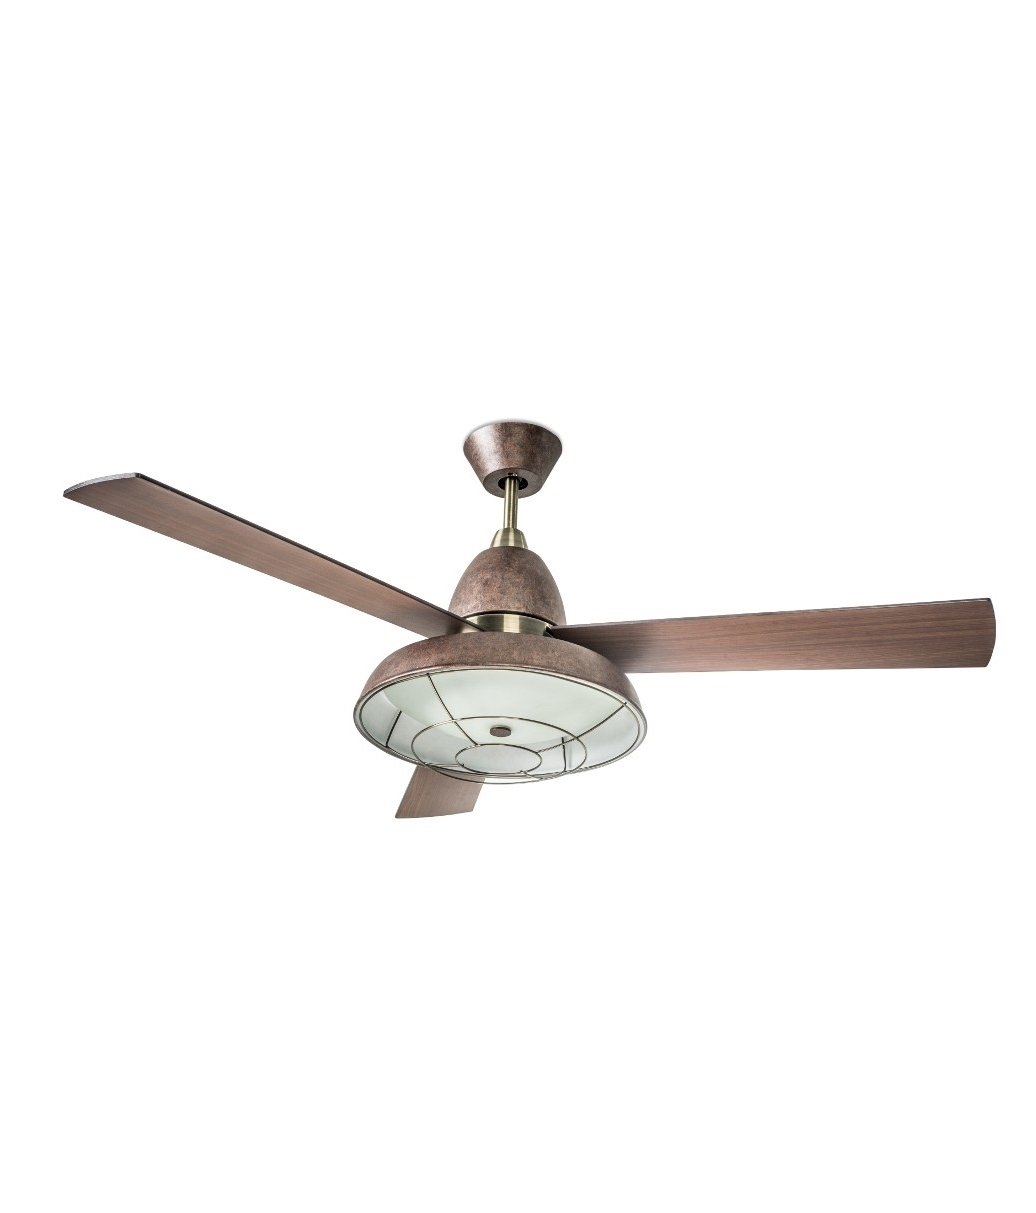 Retro Ceiling Fan With Caged Light, Vintage Ceiling Fan With Light And Remote